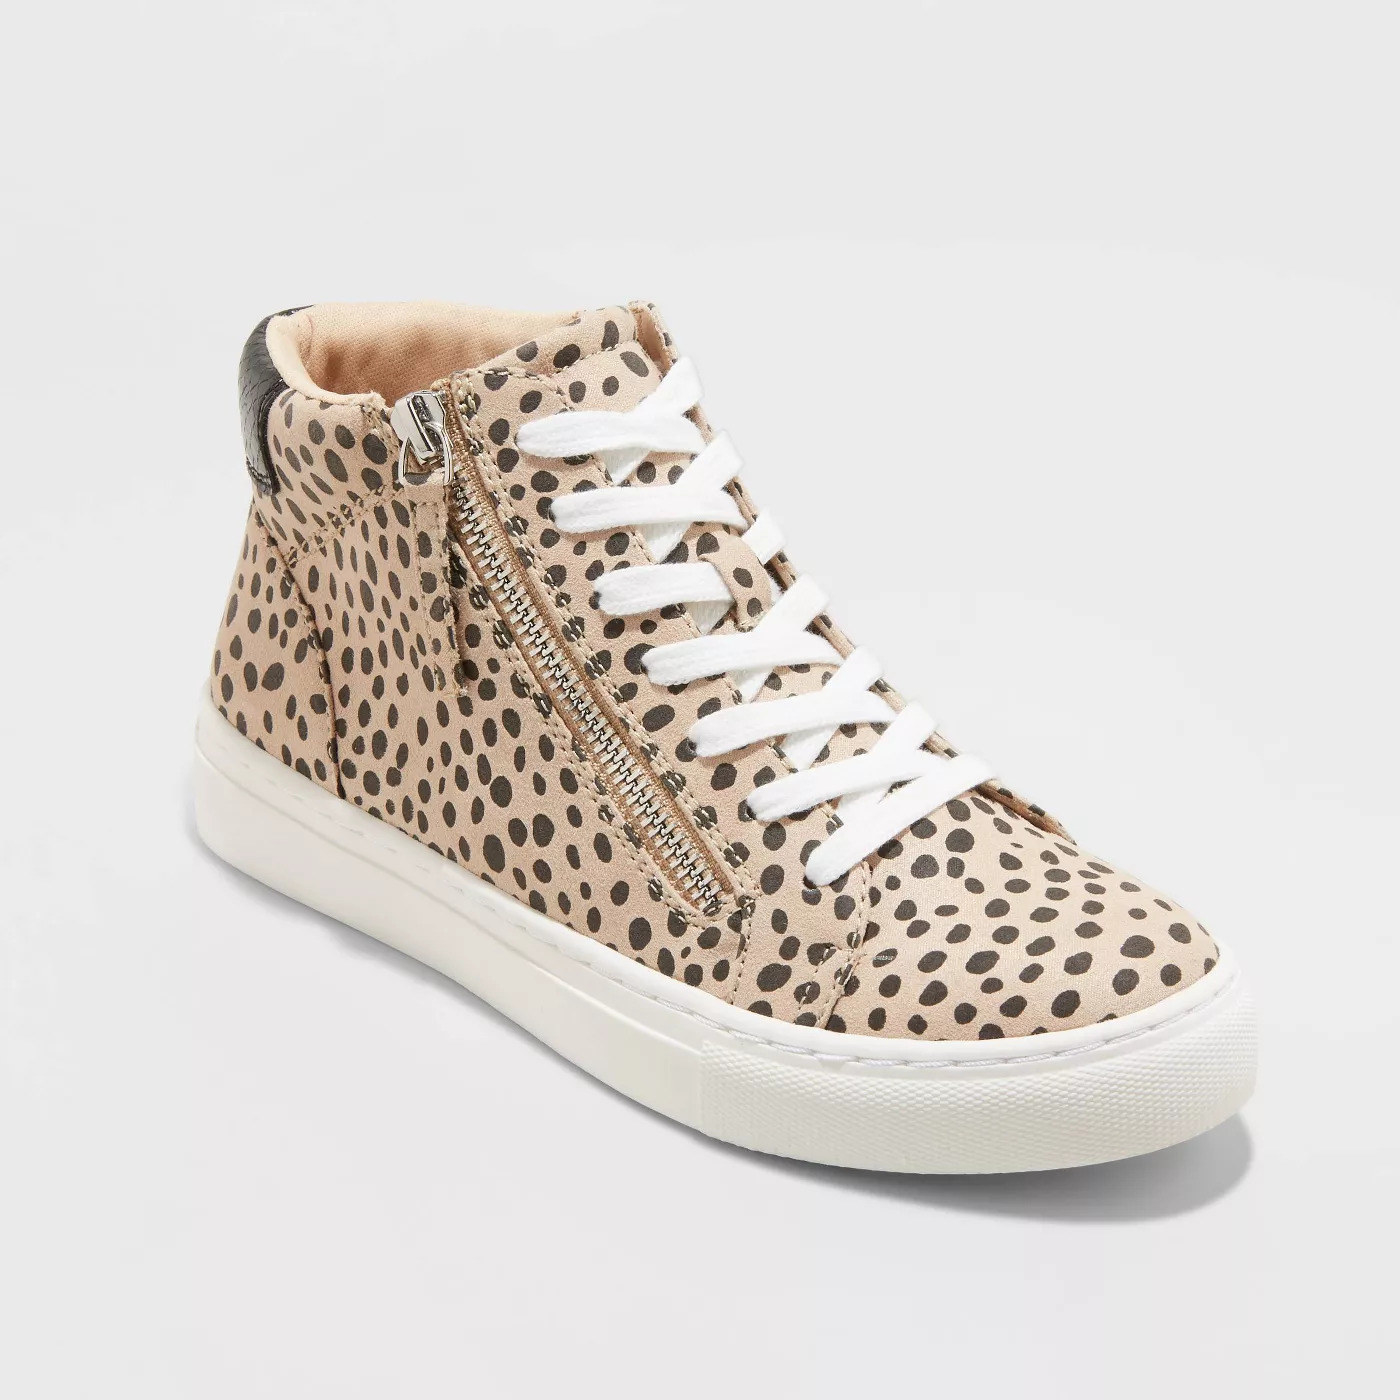 beige high top sneakers with black spots, white laces, and a zipper